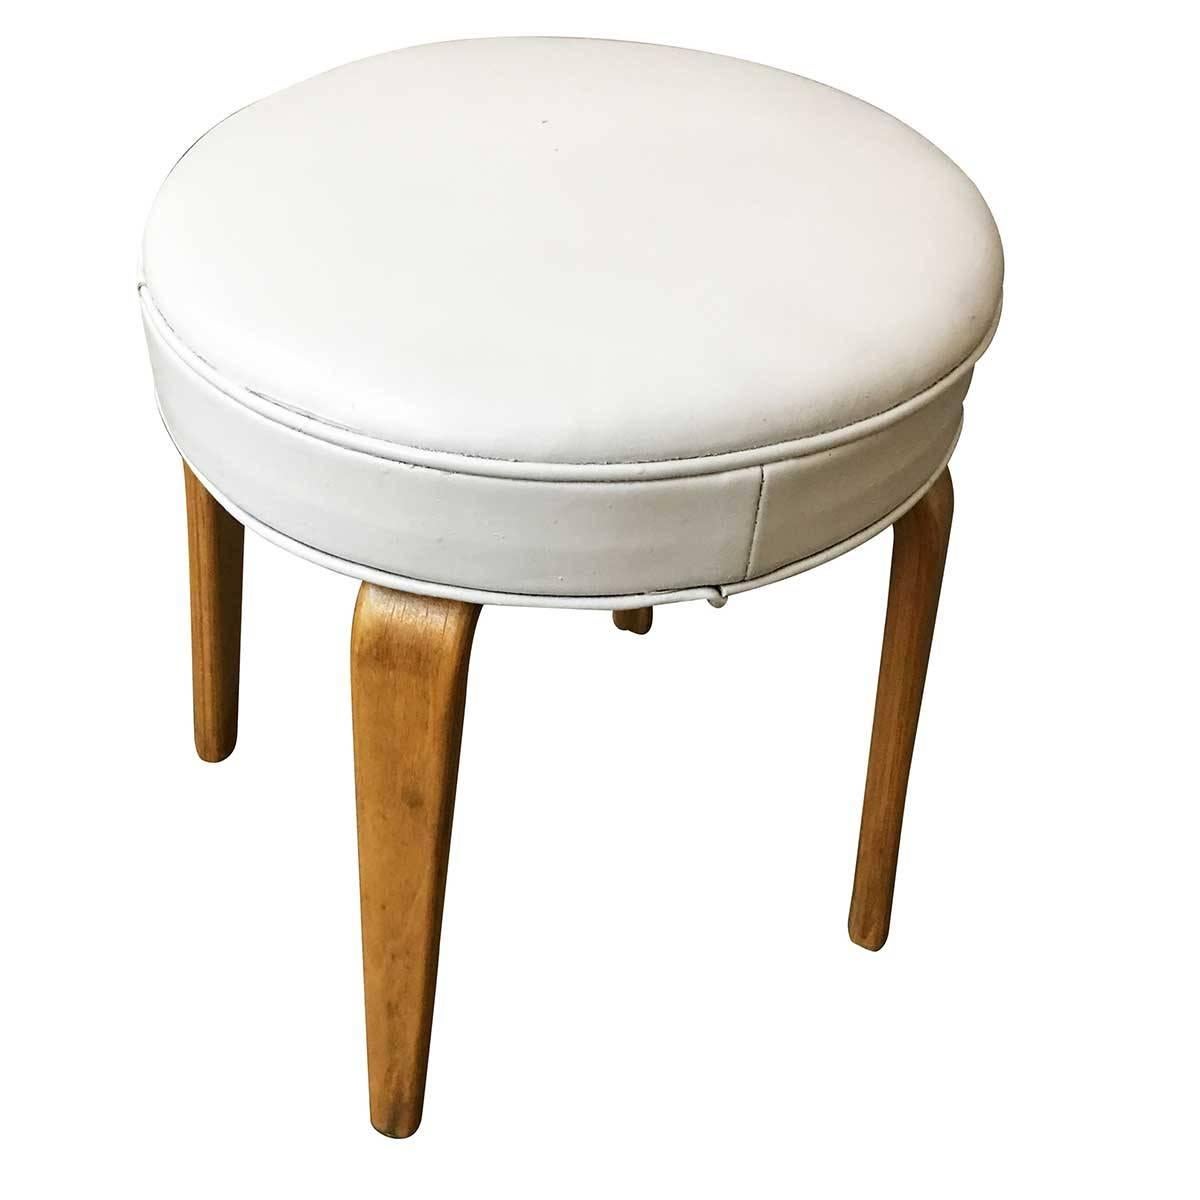 Modernist bentwood stool by Thonet much like the style made famous by Charles Eames, circa 1950. Can also be used as an ottoman.